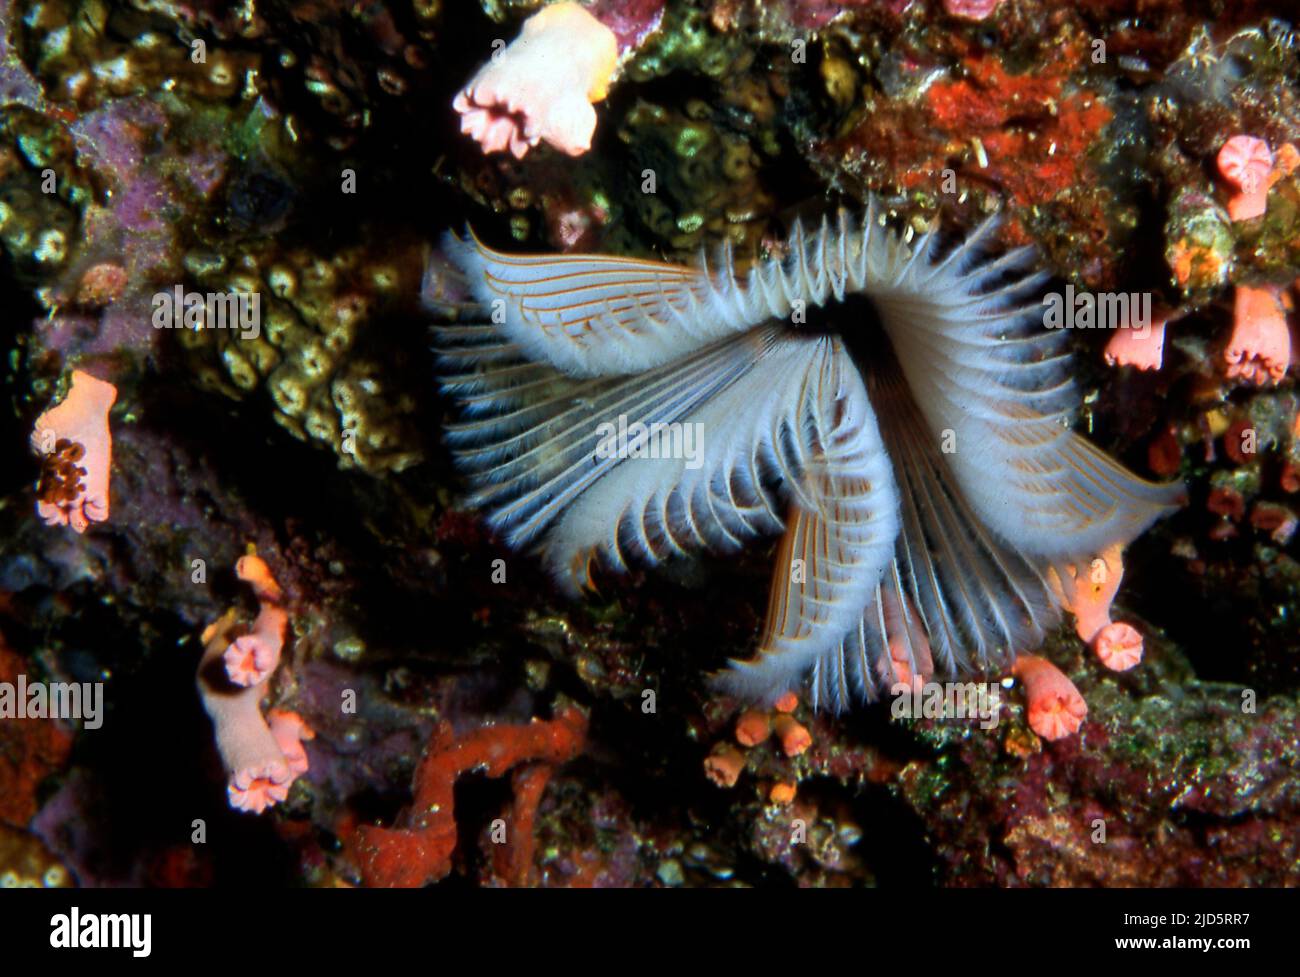 Tube worm (Sabellastarte sp.) from a reef in the Philippines. Stock Photo